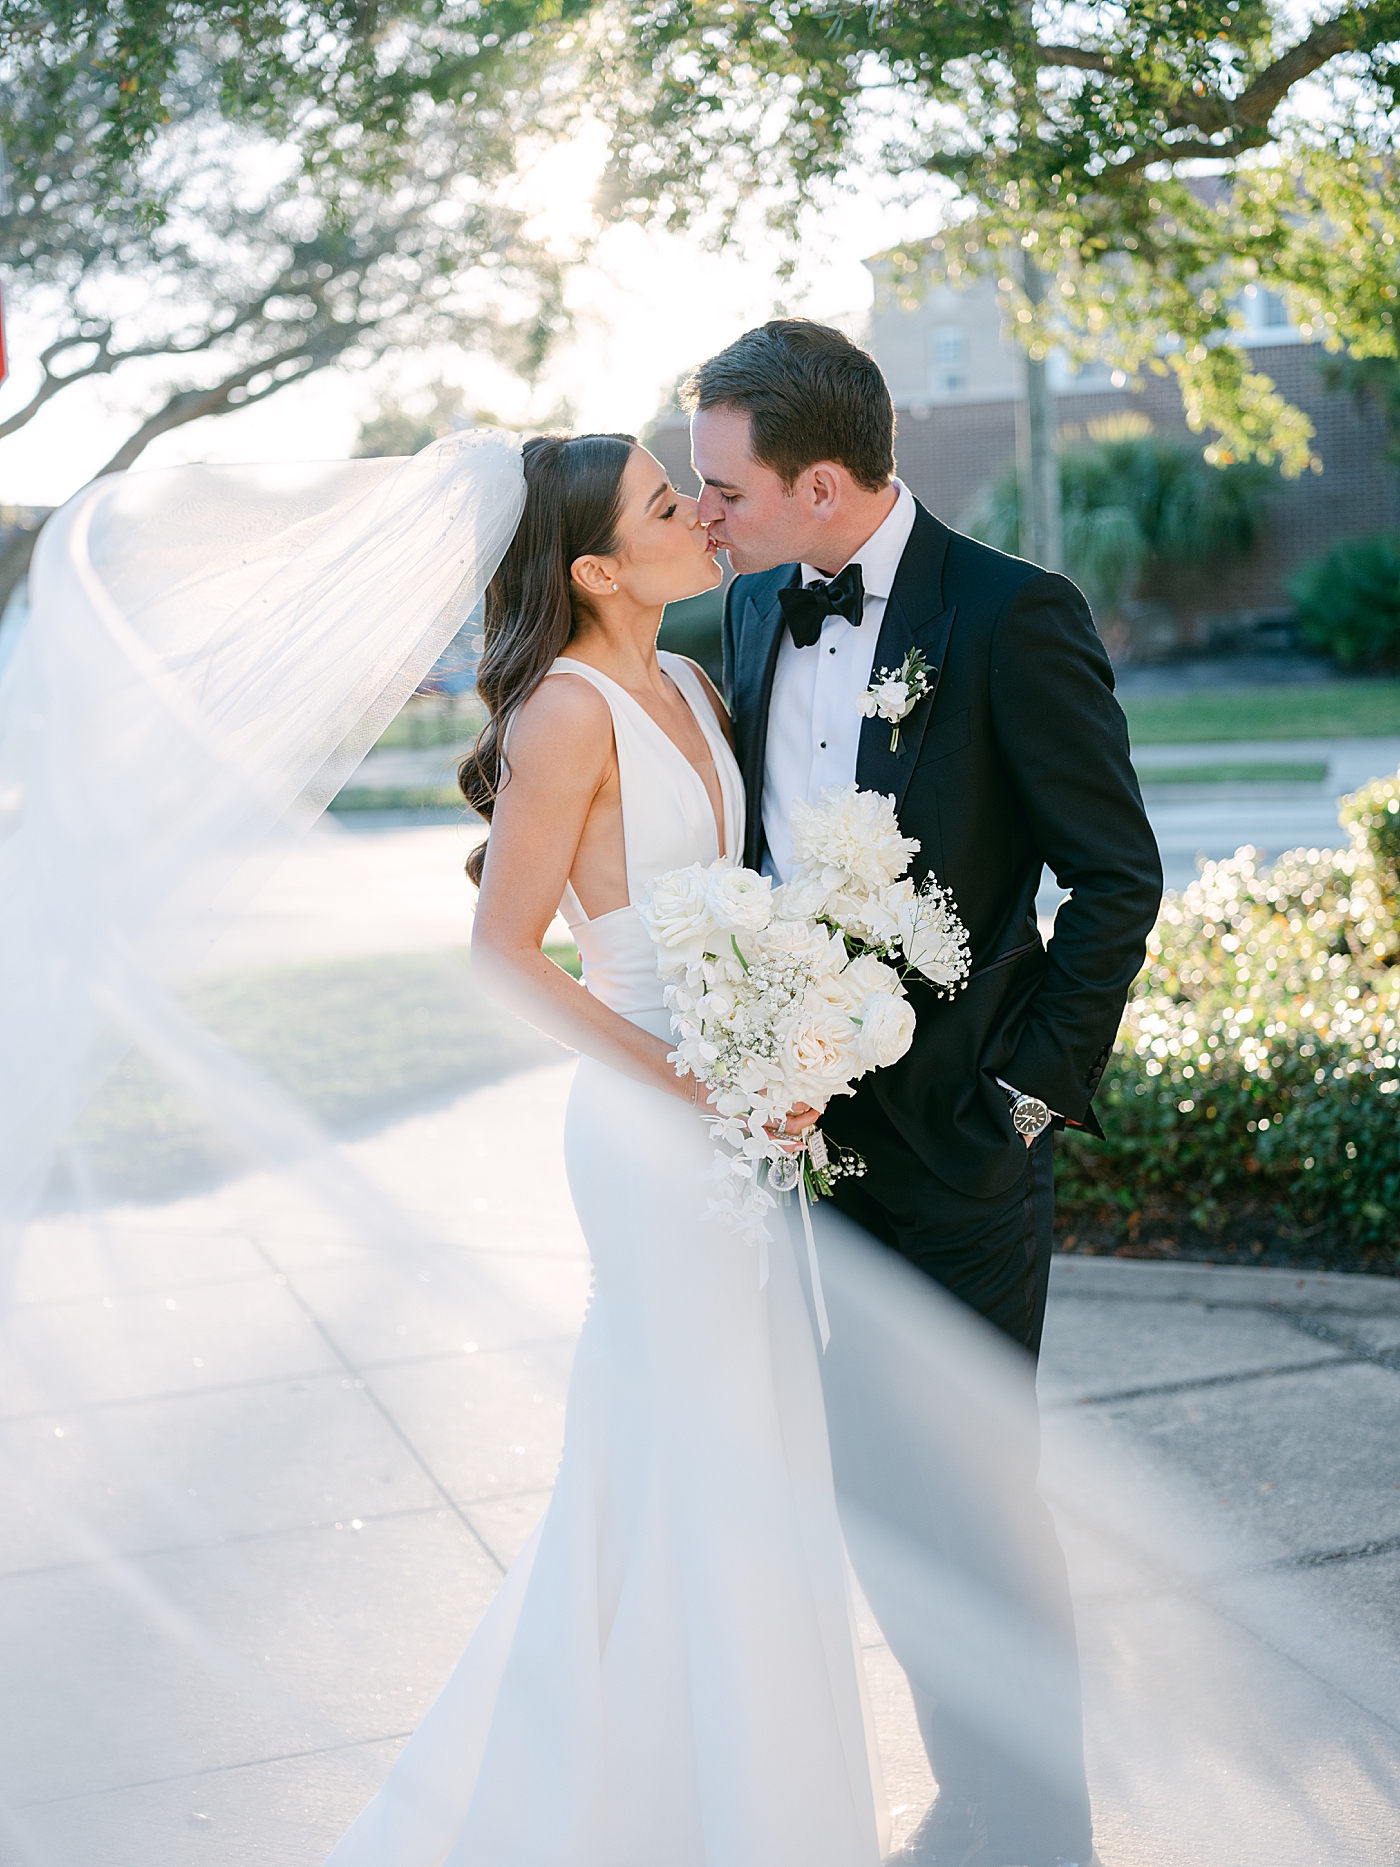 Stunning Chic Wedding At The Tampa Museum Of Art